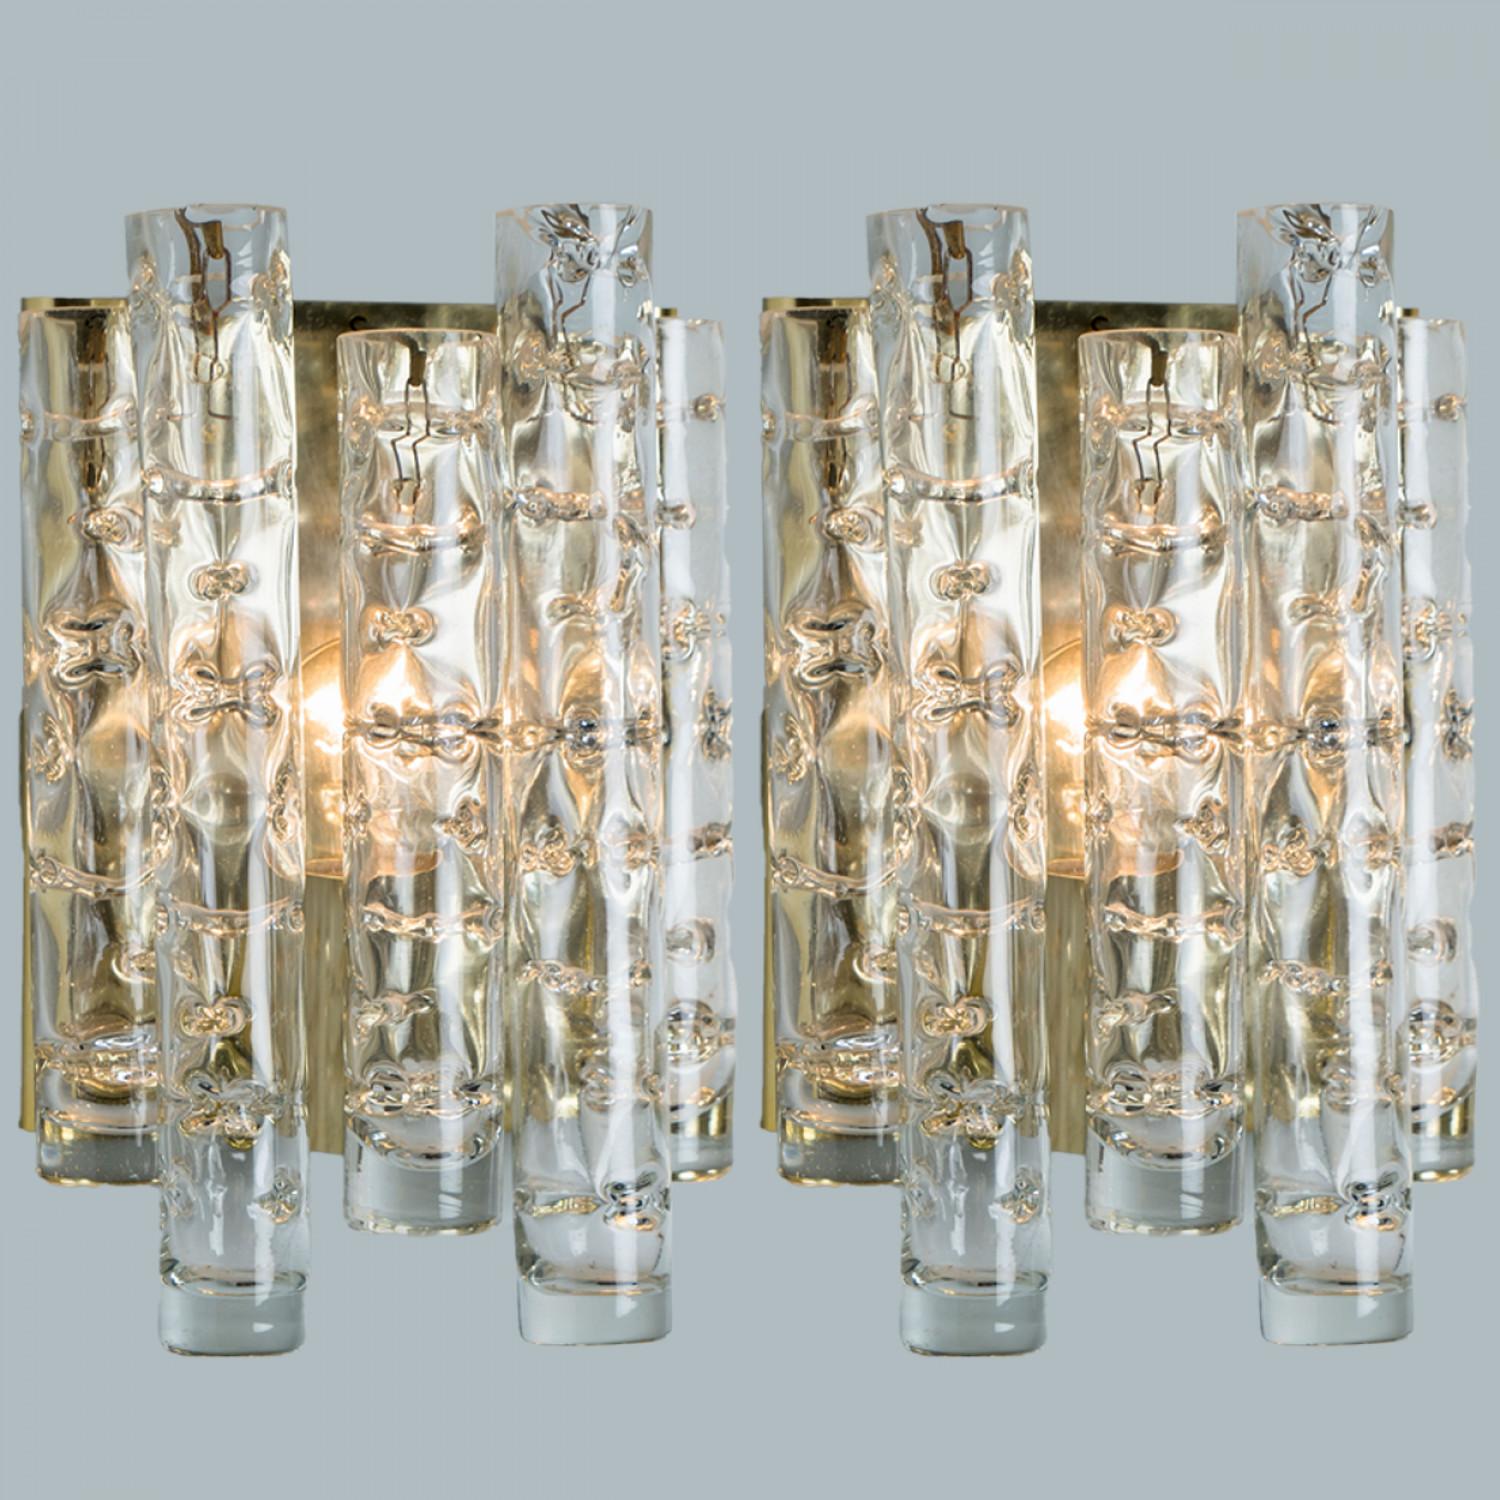 Wonderful hand blown Doria wall lamps. Manufactured in the 1960s. With textured and clear and gold structured glass pipes.
The stylish elegance of this lamp suits many environments, from mid century to Hollywood Regency, from Danish modern to Space